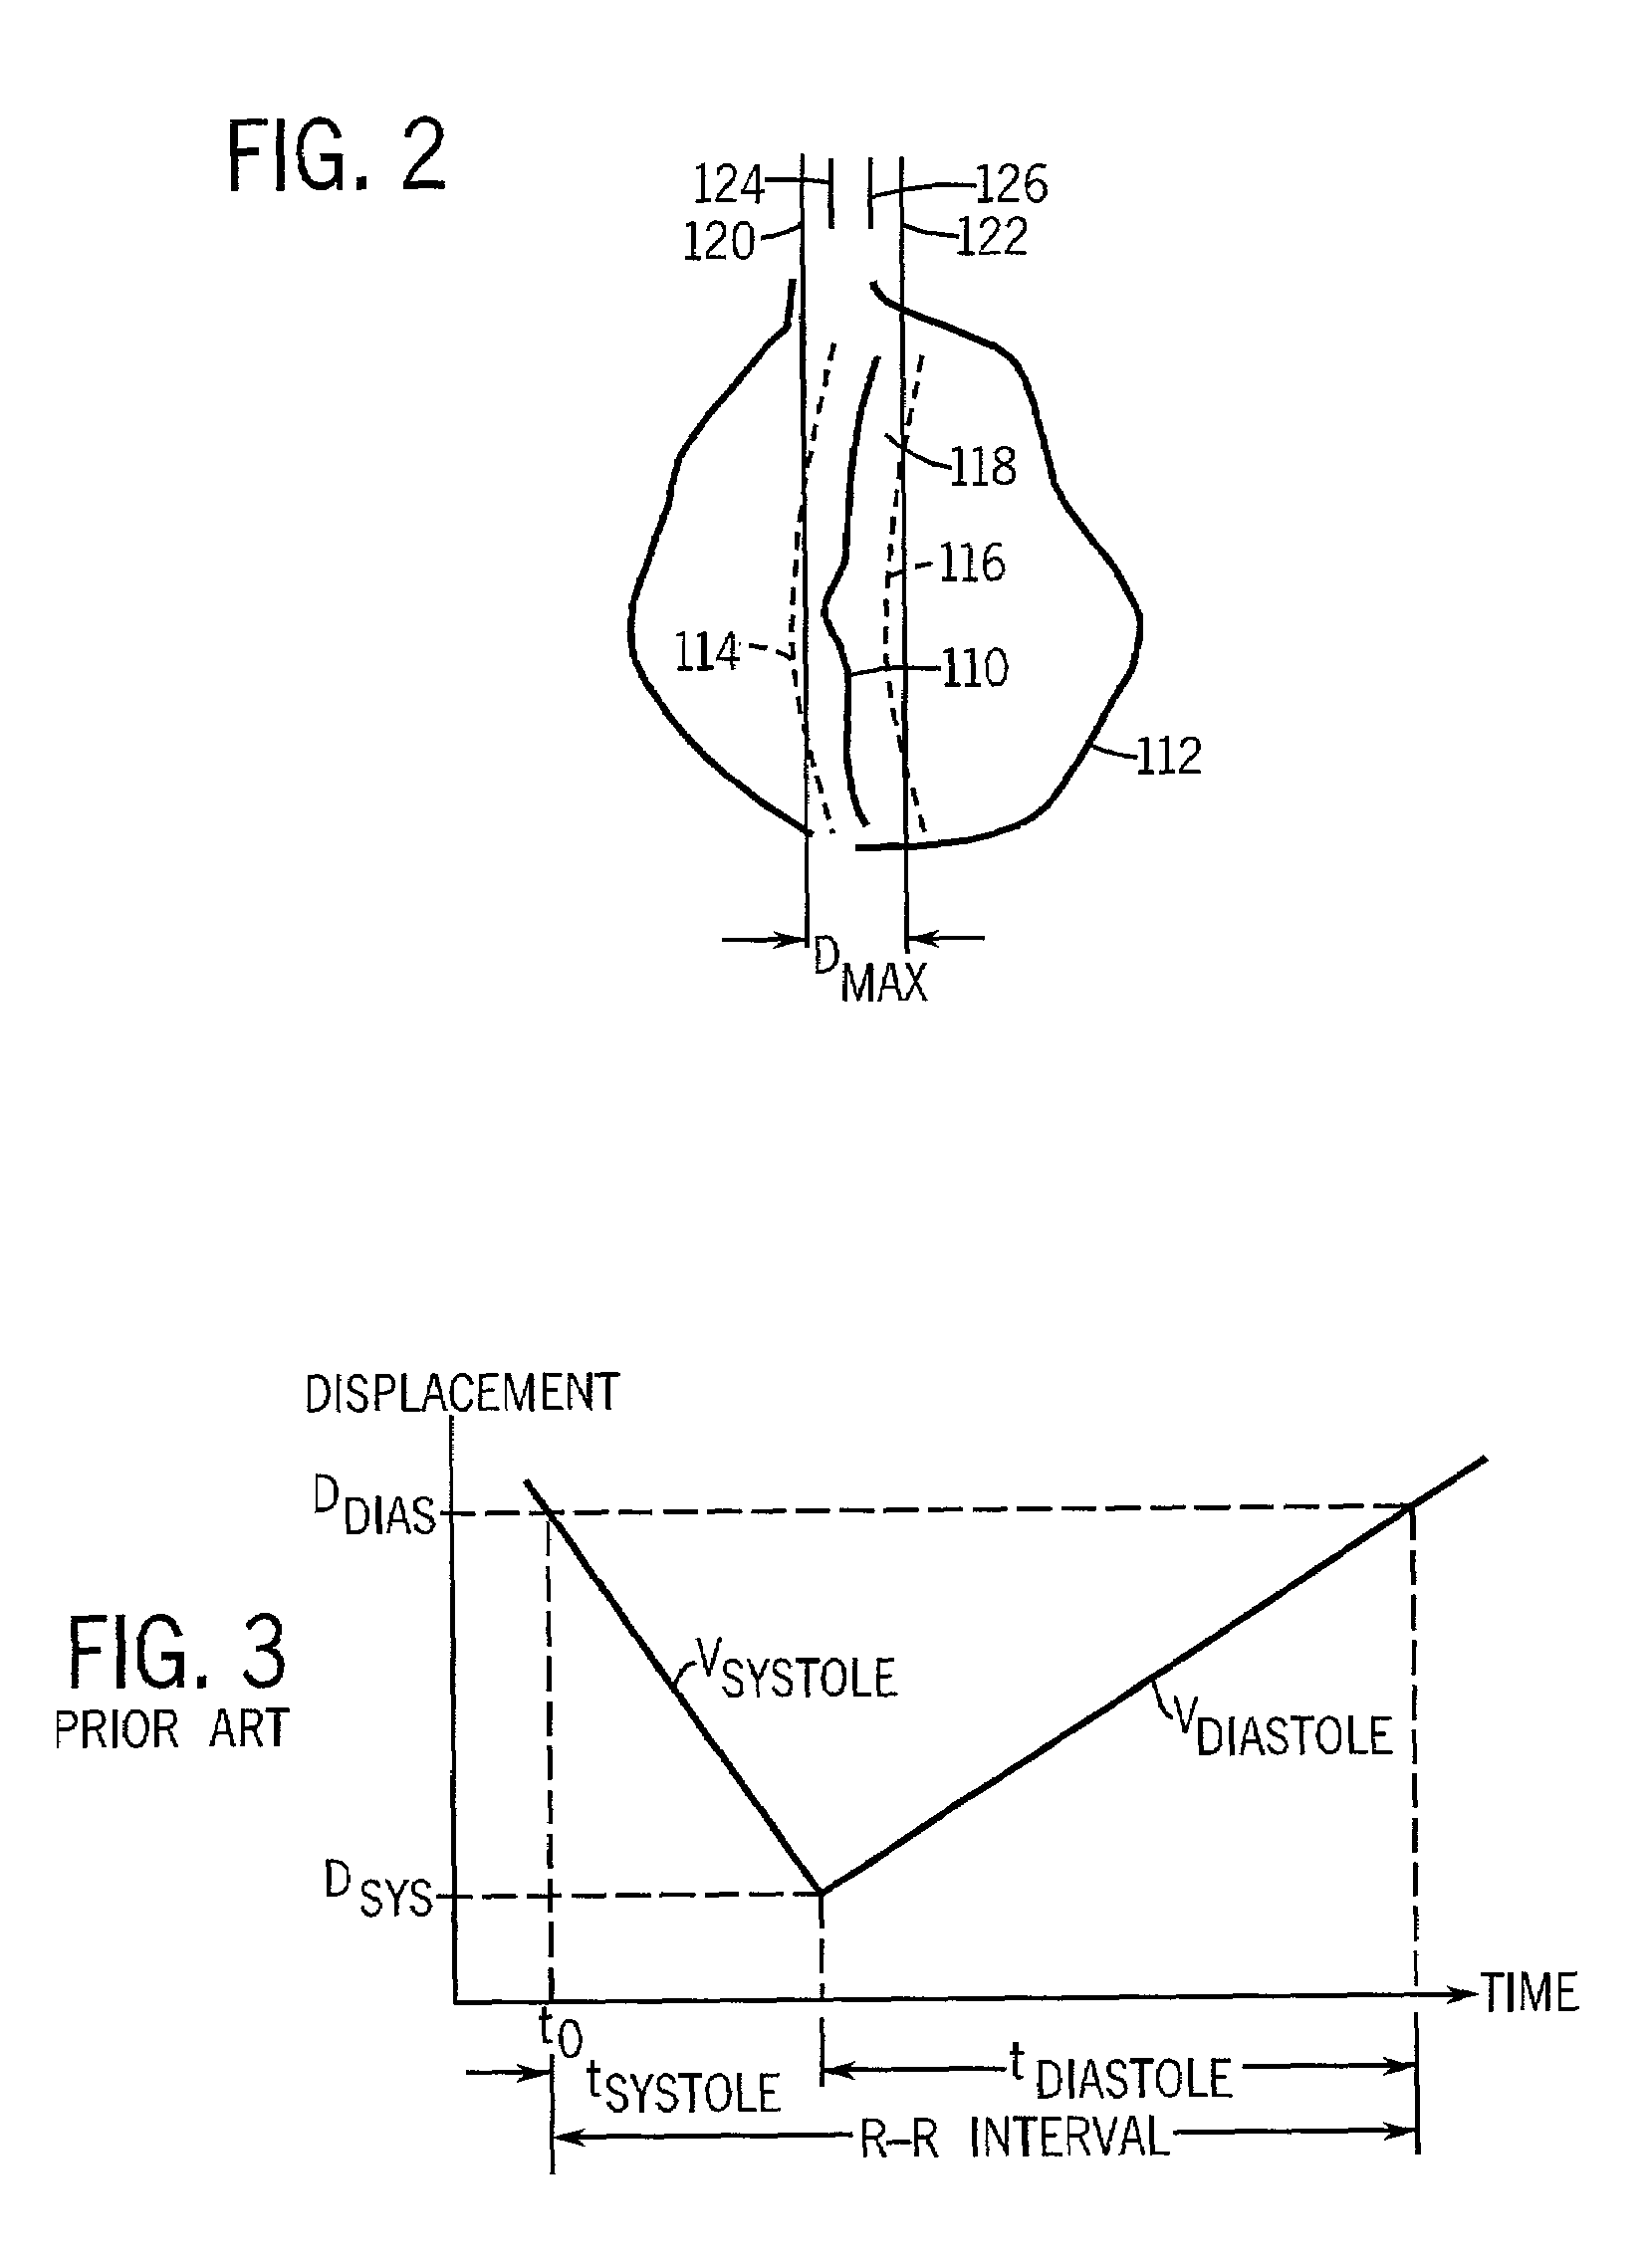 Method and apparatus for automated tracking of non-linear vessel movement using MR imaging